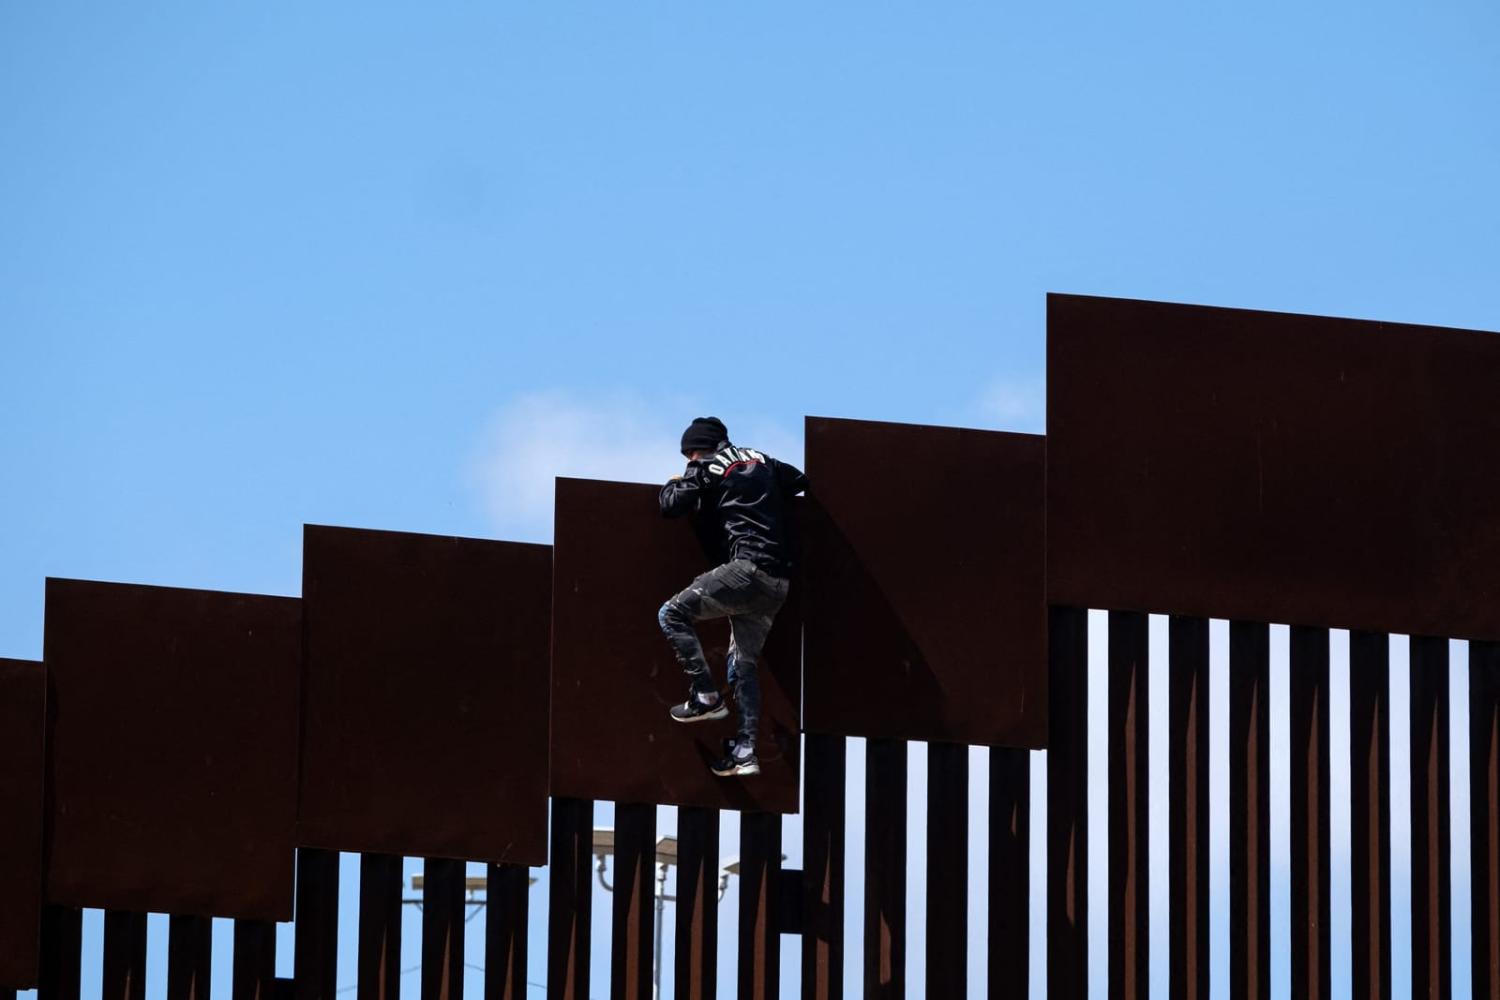 Turning back asylum seekers at the border could create an incentive for human smuggling (Guillermo Arias/AFP via Getty Images)